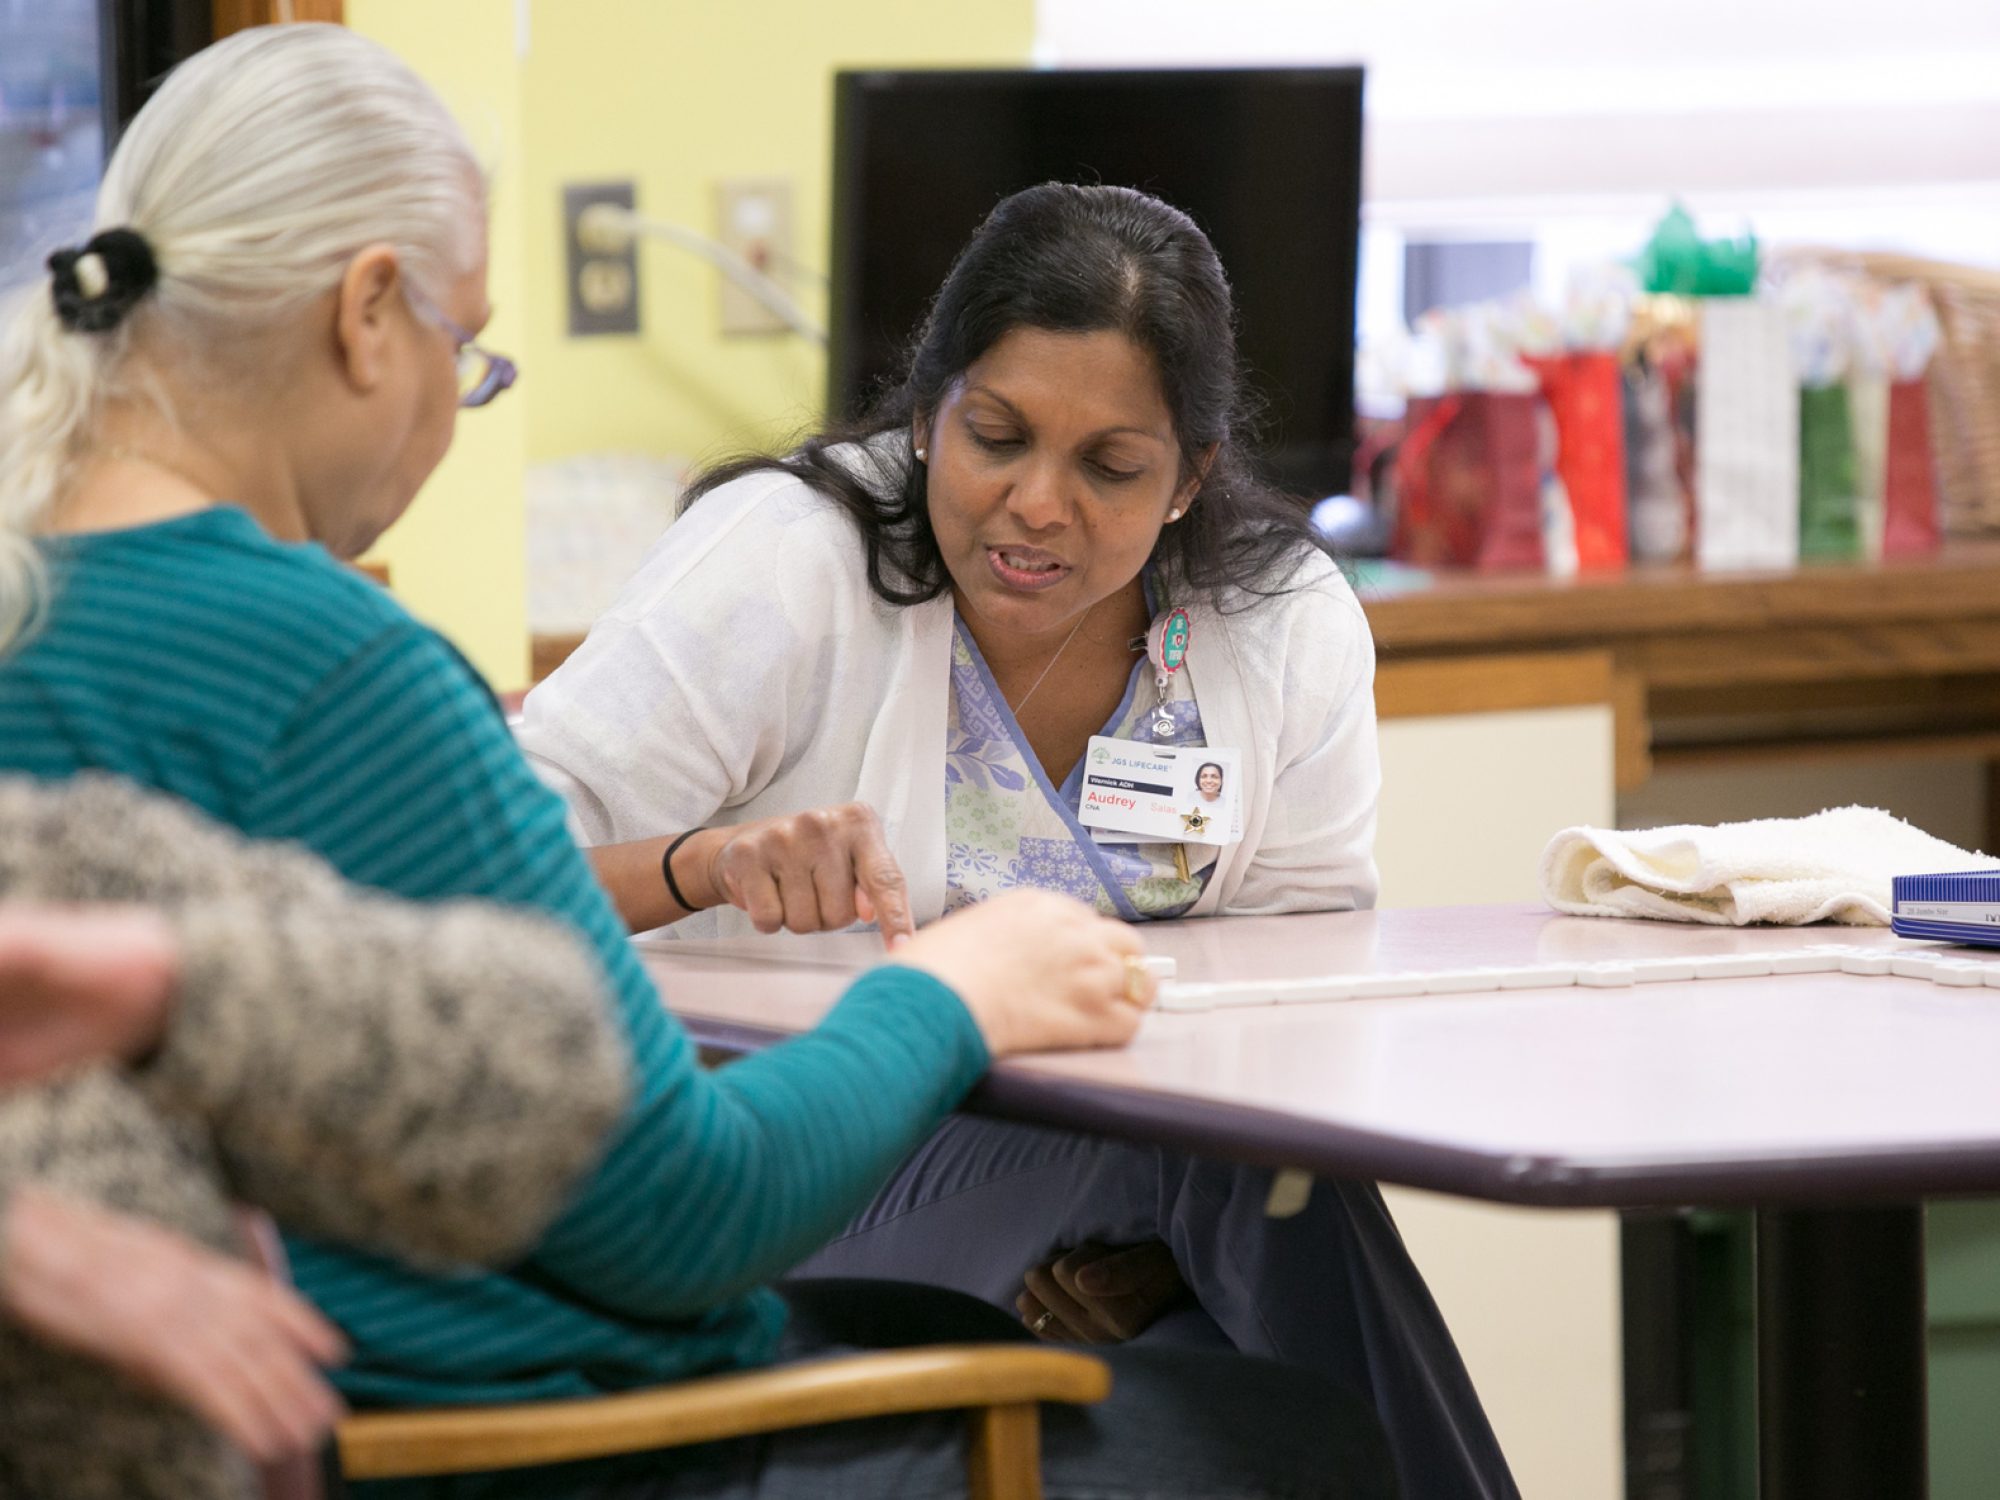 A JGS CNA working with a patient.